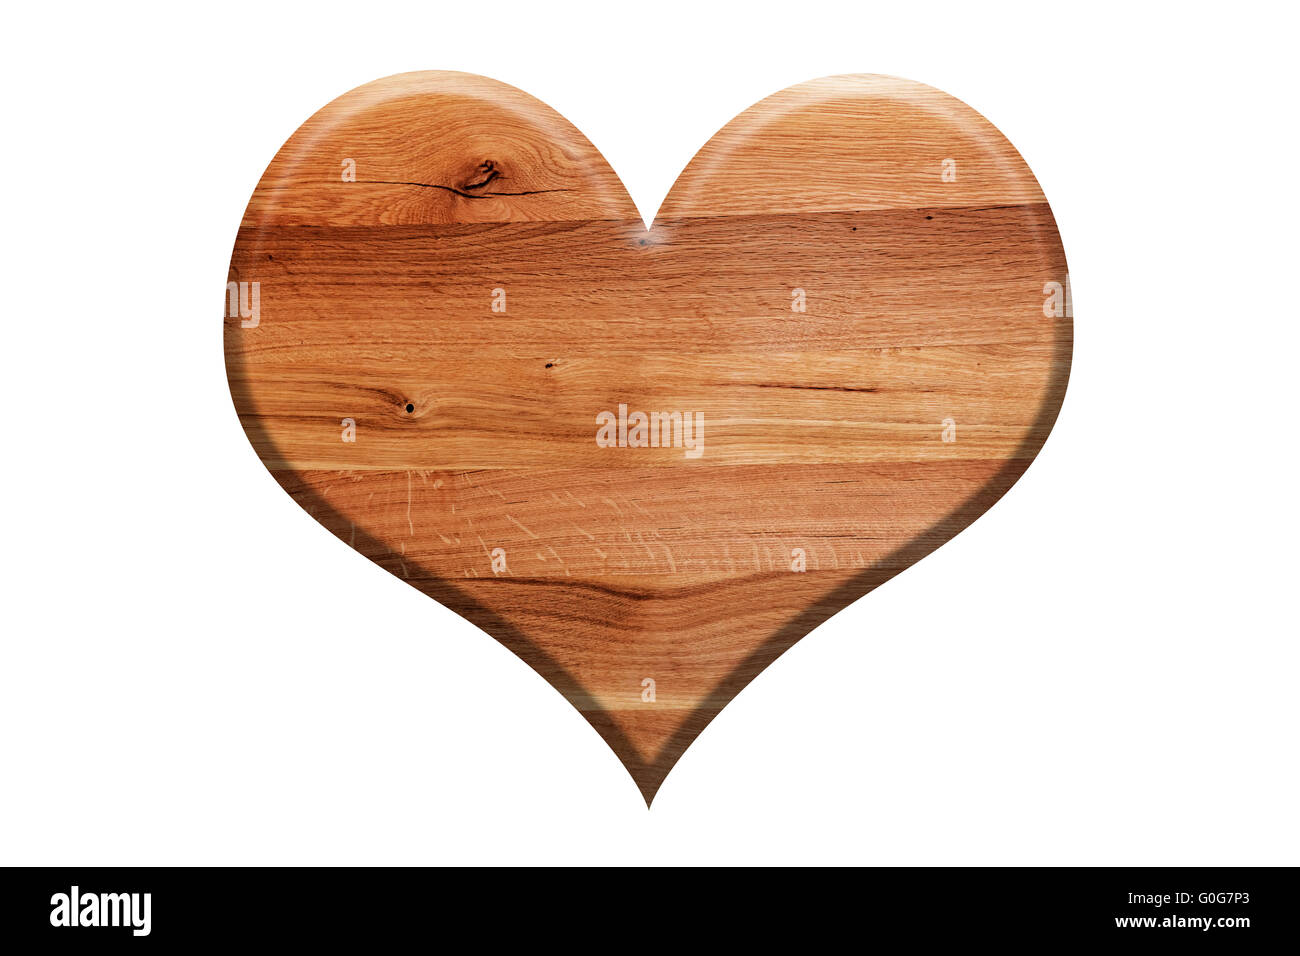 Wooden heart shape isolated on white. Love symbol Stock Photo